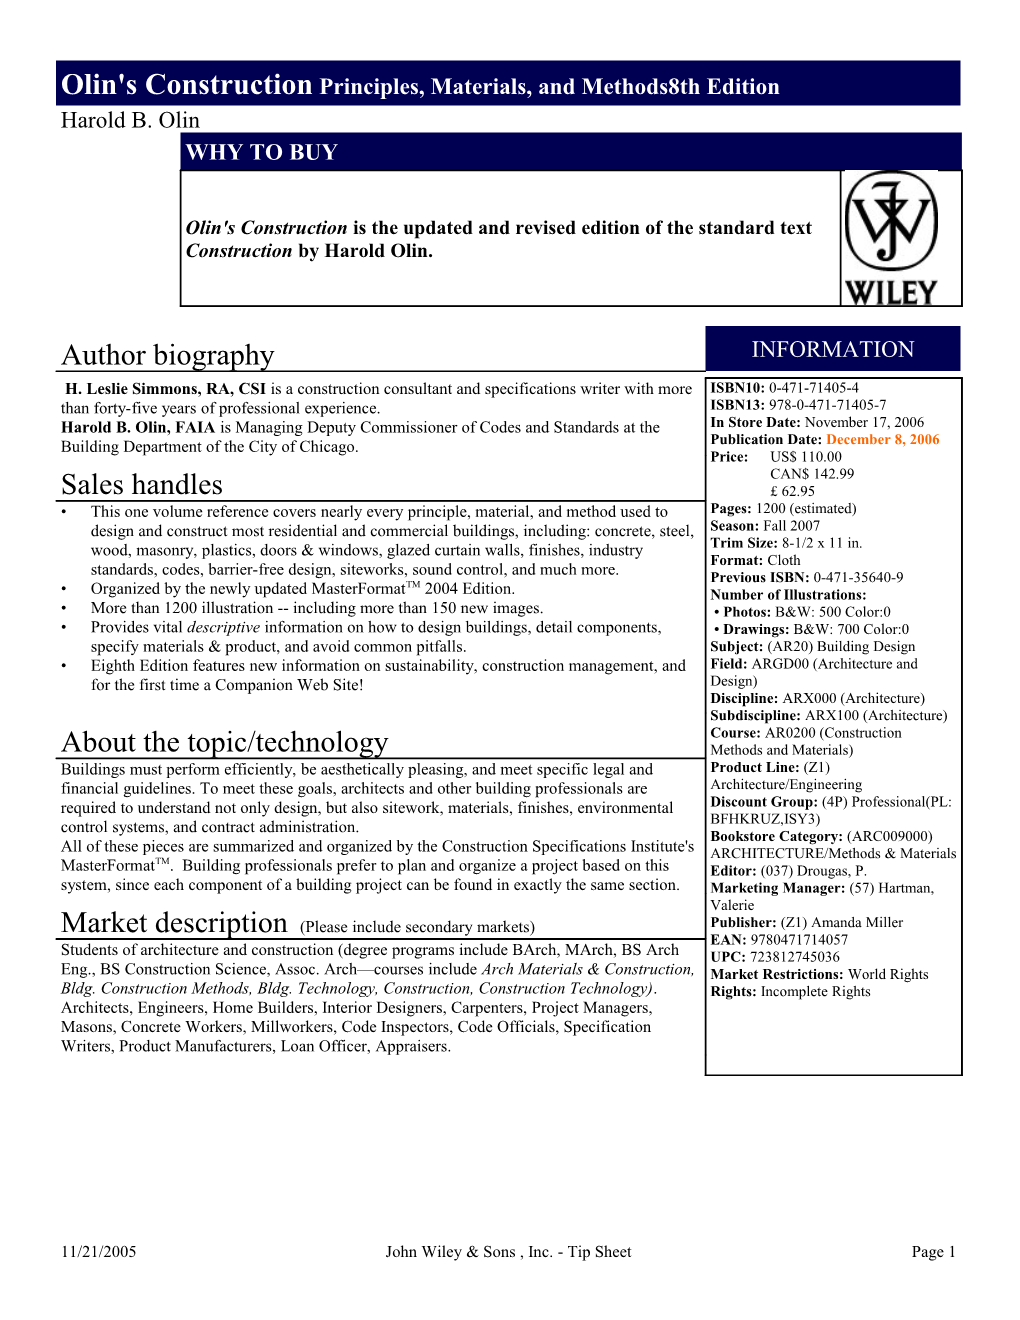 11/21/2005John Wiley & Sons , Inc. - Tip Sheet Page 1